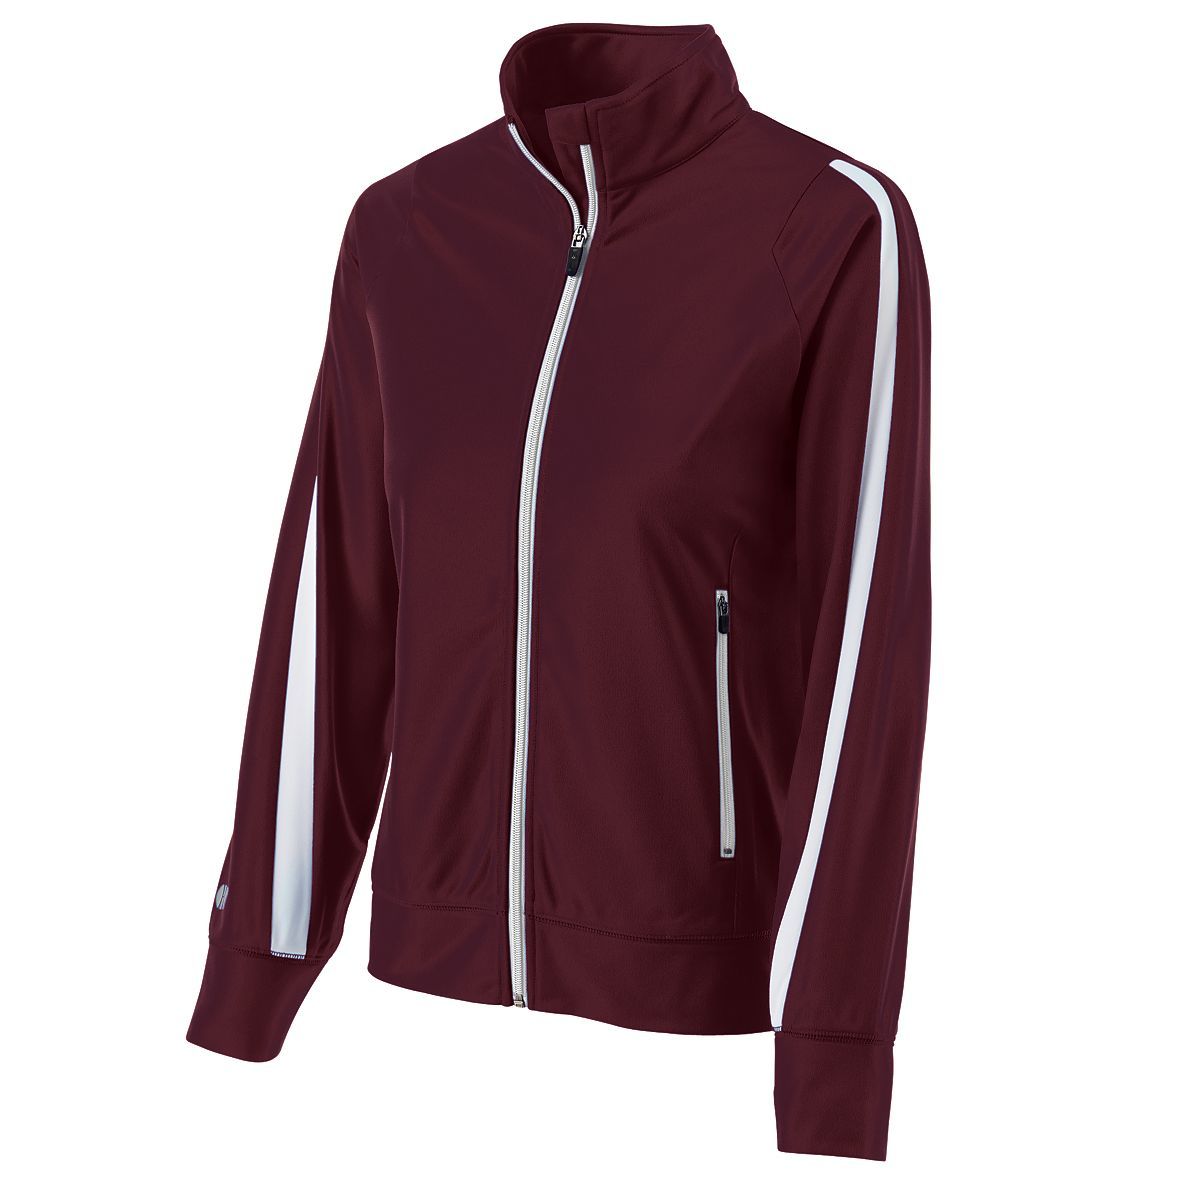 Holloway Ladies Determination Jacket in Maroon/White  -Part of the Ladies, Ladies-Jacket, Holloway, Outerwear product lines at KanaleyCreations.com